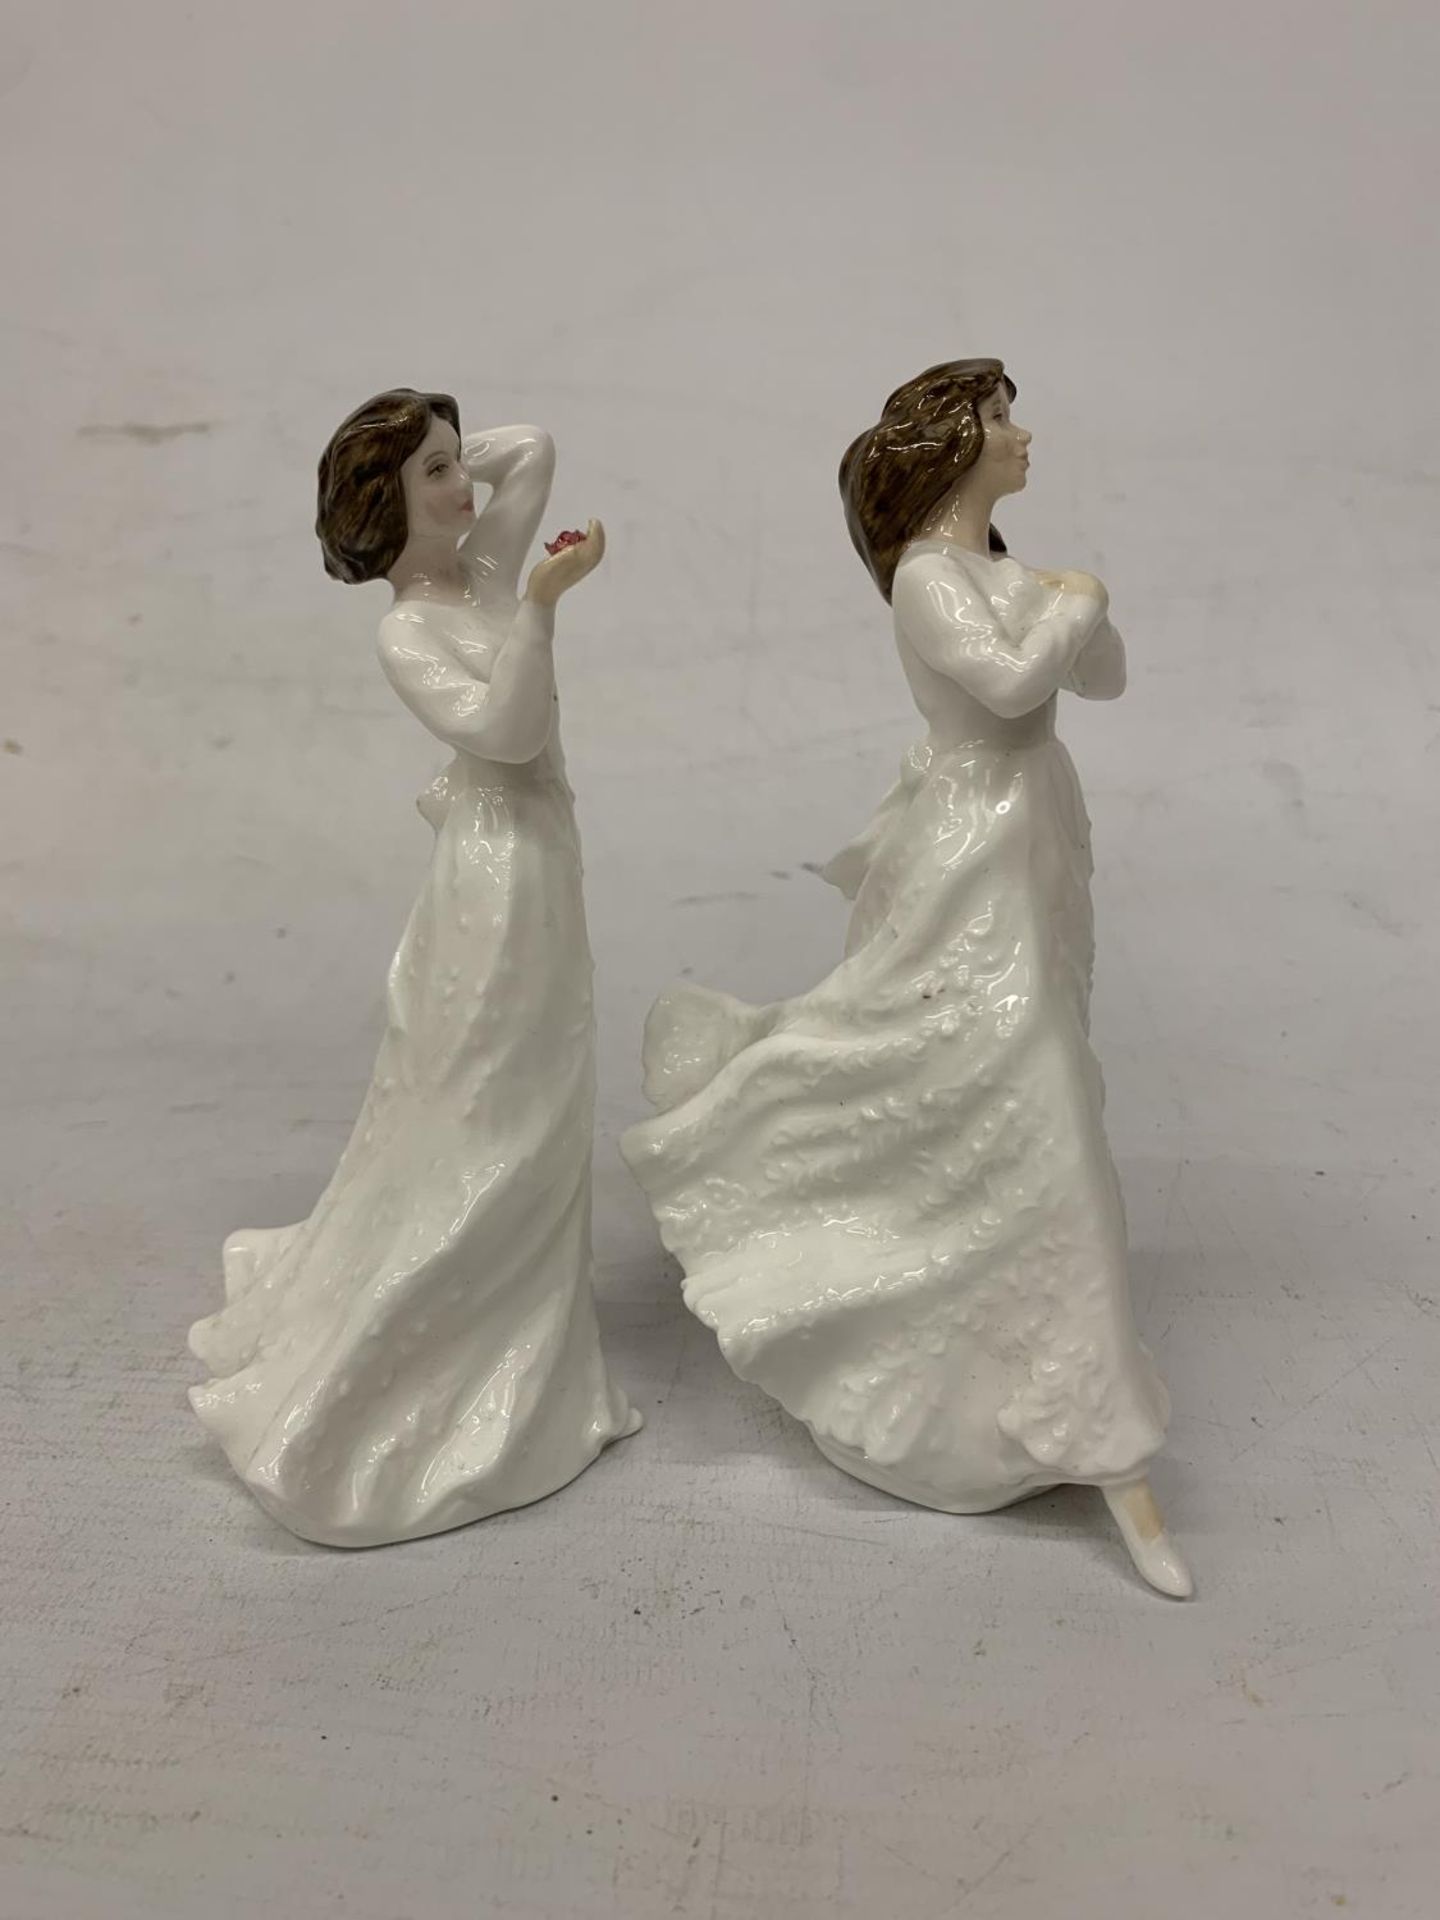 TWO ROYAL DOULTON FIGURES "WITH LOVE" AND "FORGET-ME-NOT" - Image 2 of 4